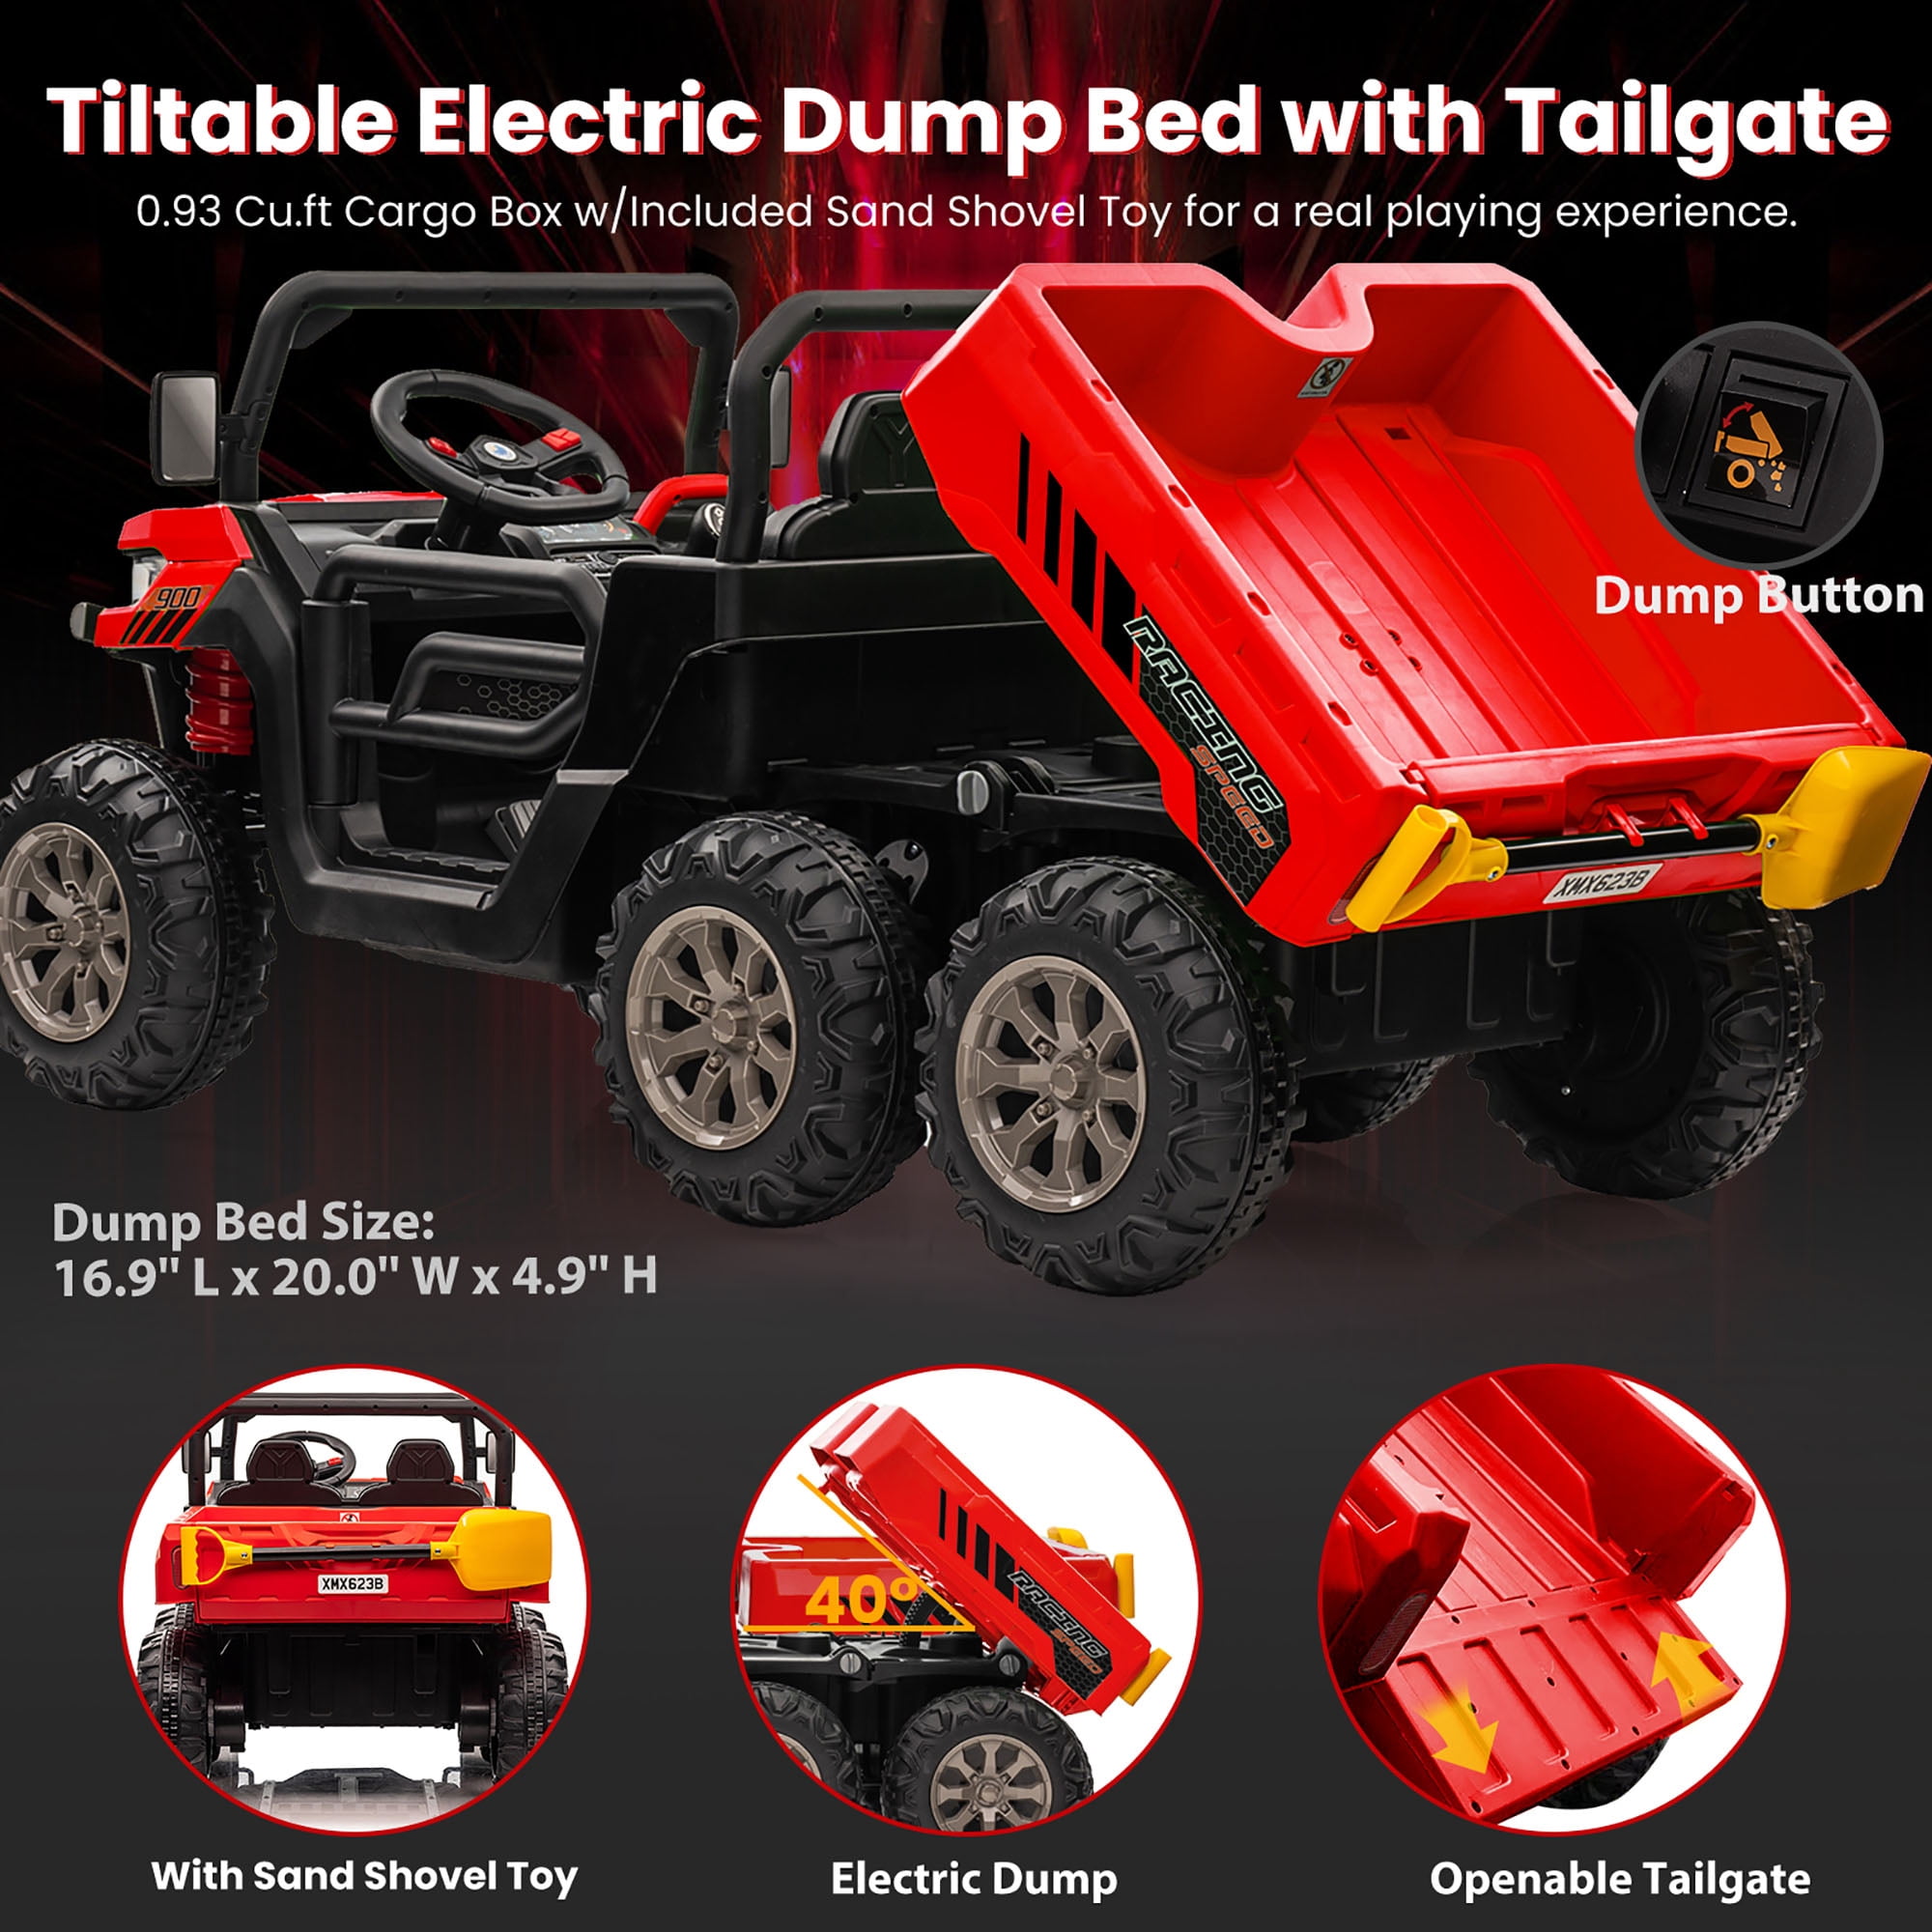 Joyracer 4x4 24V Ride on Dump Truck with Remote Control, Electric Powered 6-Wheel UTV Car, 2 Seater Kids Ride on Toys w/ Tipping Bucket Trailer, Shovel, Spring Suspension, Bluetooth Music, Red